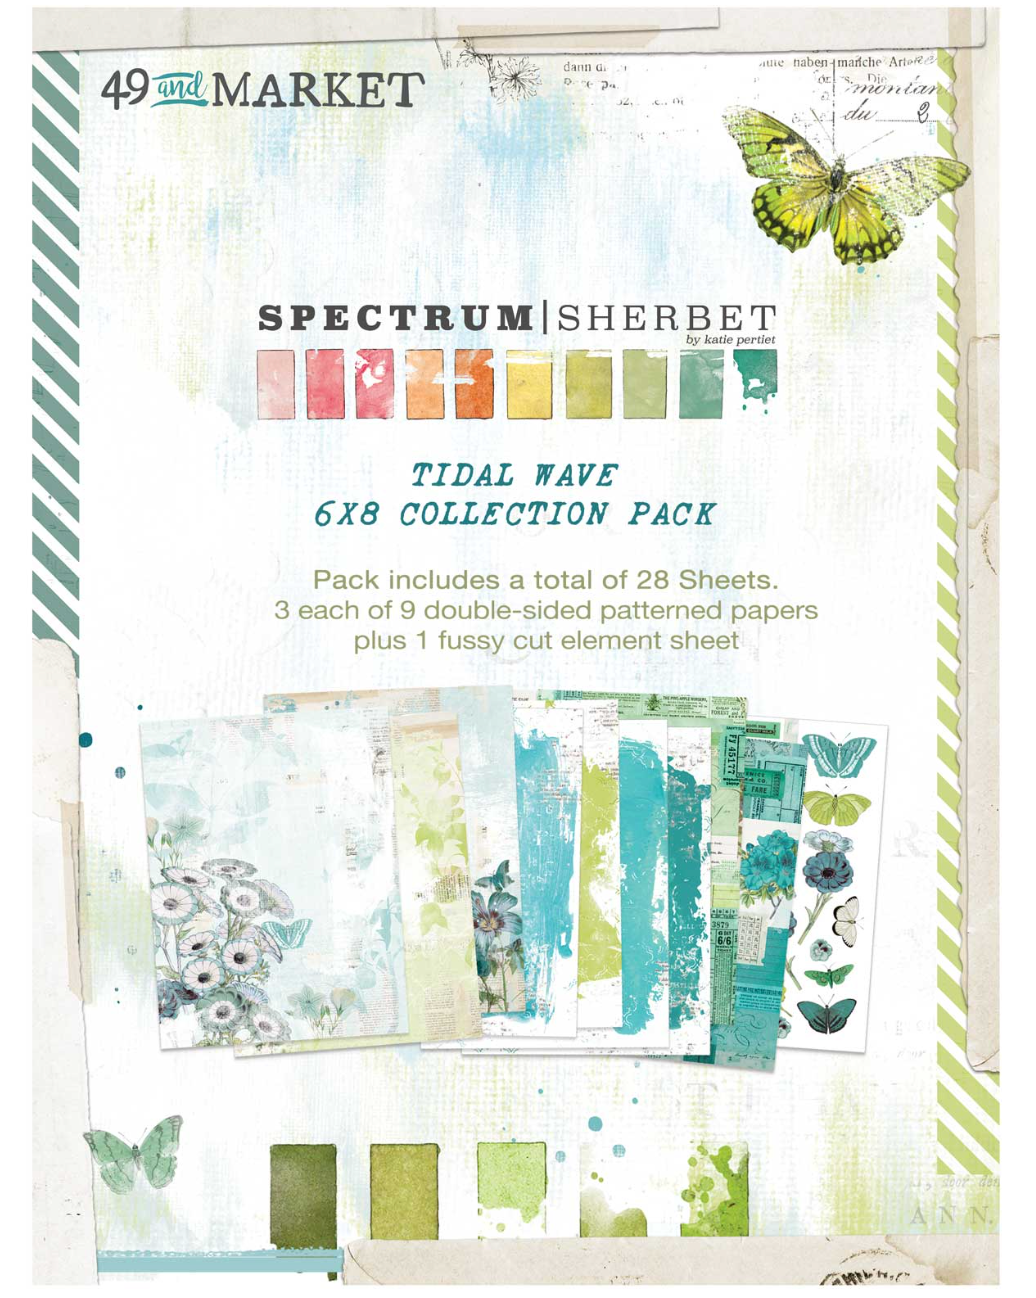 49 and Market - Spectrum Sherbet - Tidal Wave 6x8 inch Collection Pack